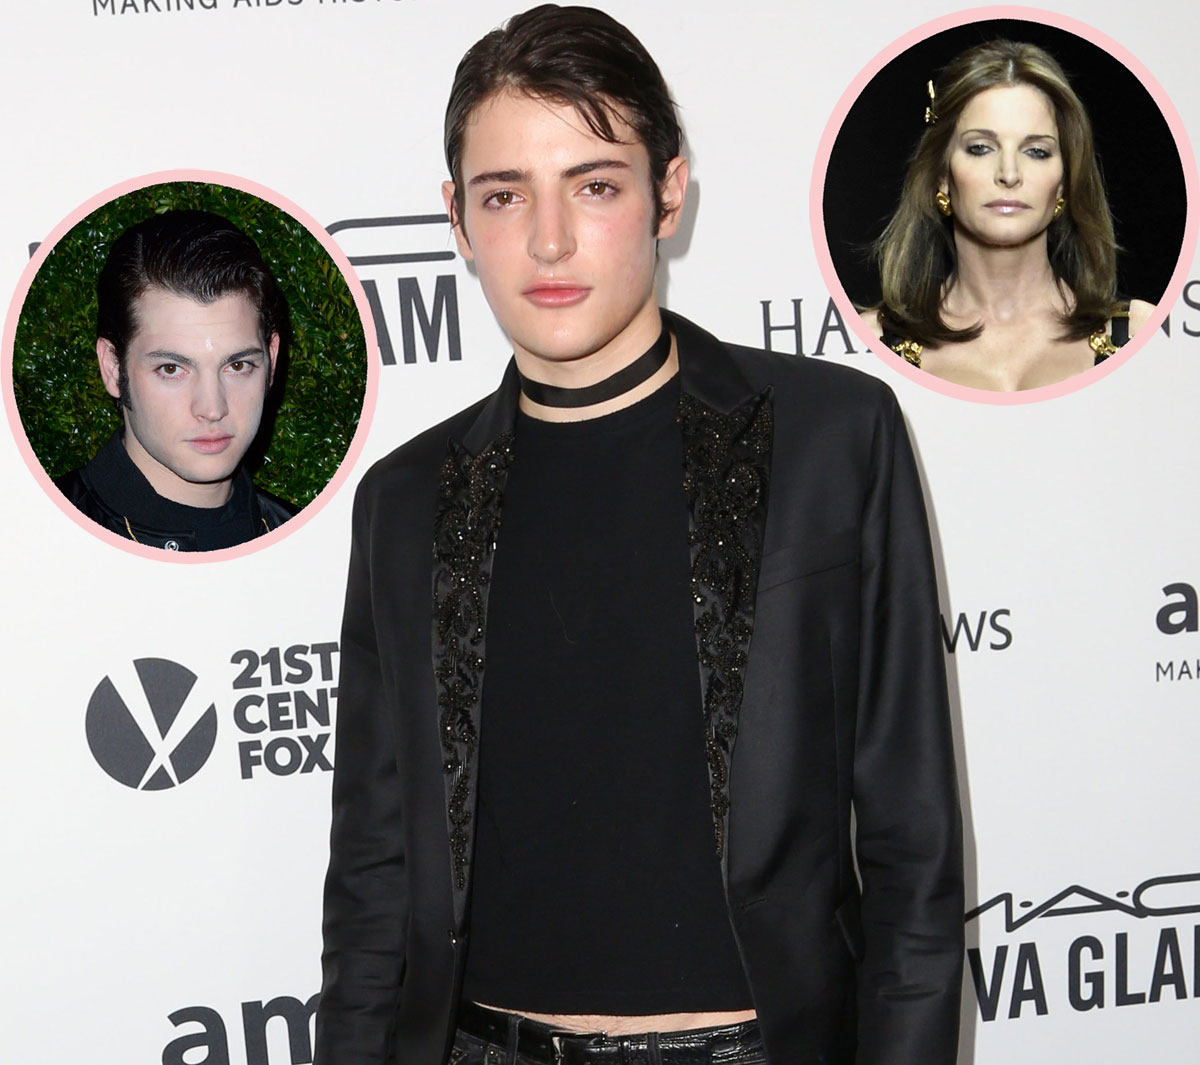 Model Stephanie Seymour's Son Harry Brant Dead At 24 After Overdose ...